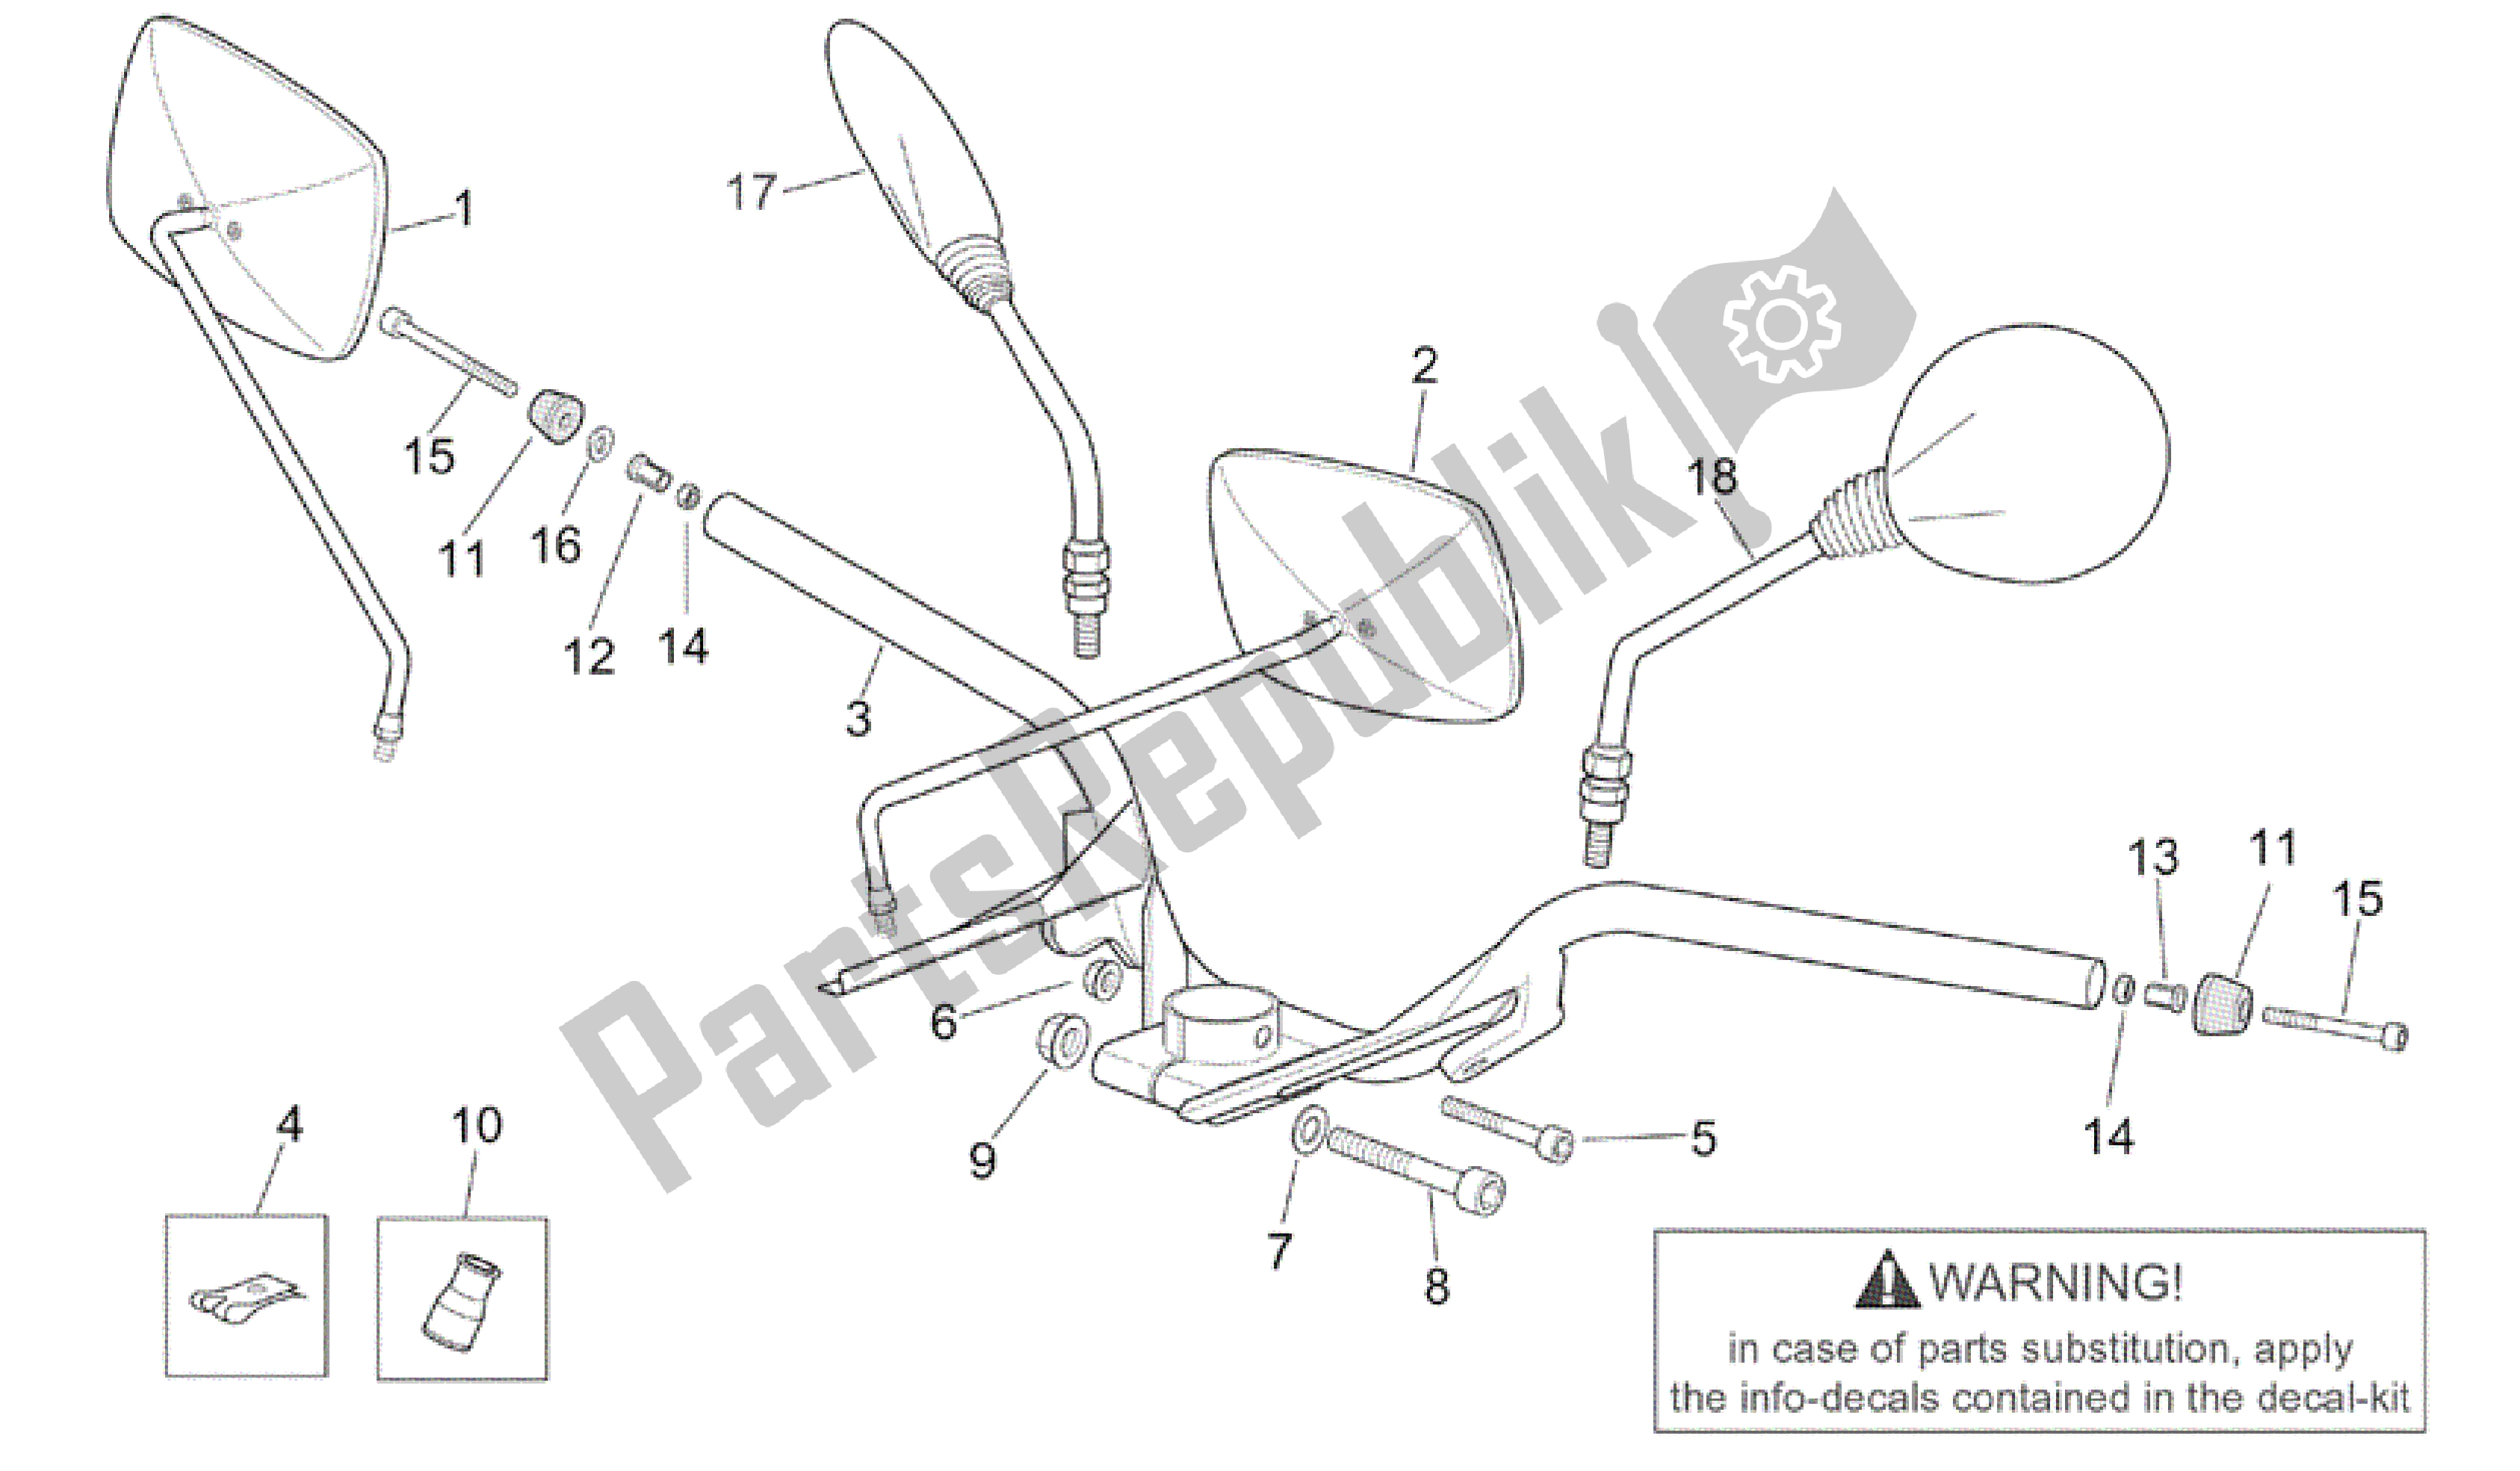 All parts for the Handlebar of the Aprilia Scarabeo 125 1999 - 2004